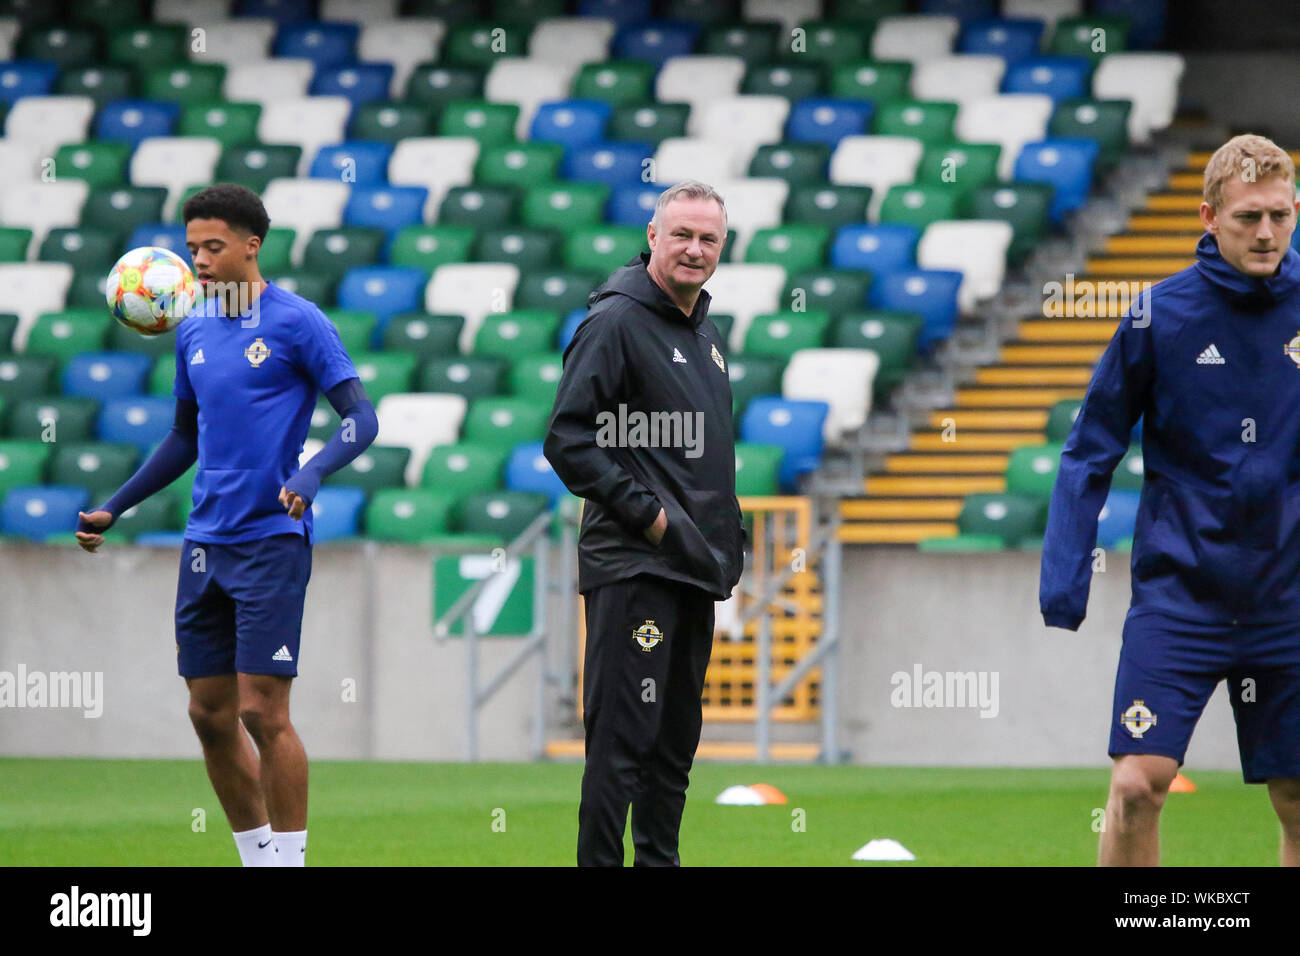 Windsor Park, Belfast, Northern Ireland. 04th Sept 2019. Northern Ireland training in Belfast this morning ahead of their international football friendly against Luxembourg tomorrow night in the stadium. Manager Michael O'Neill at training. Credit: David Hunter/Alamy Live News. Stock Photo